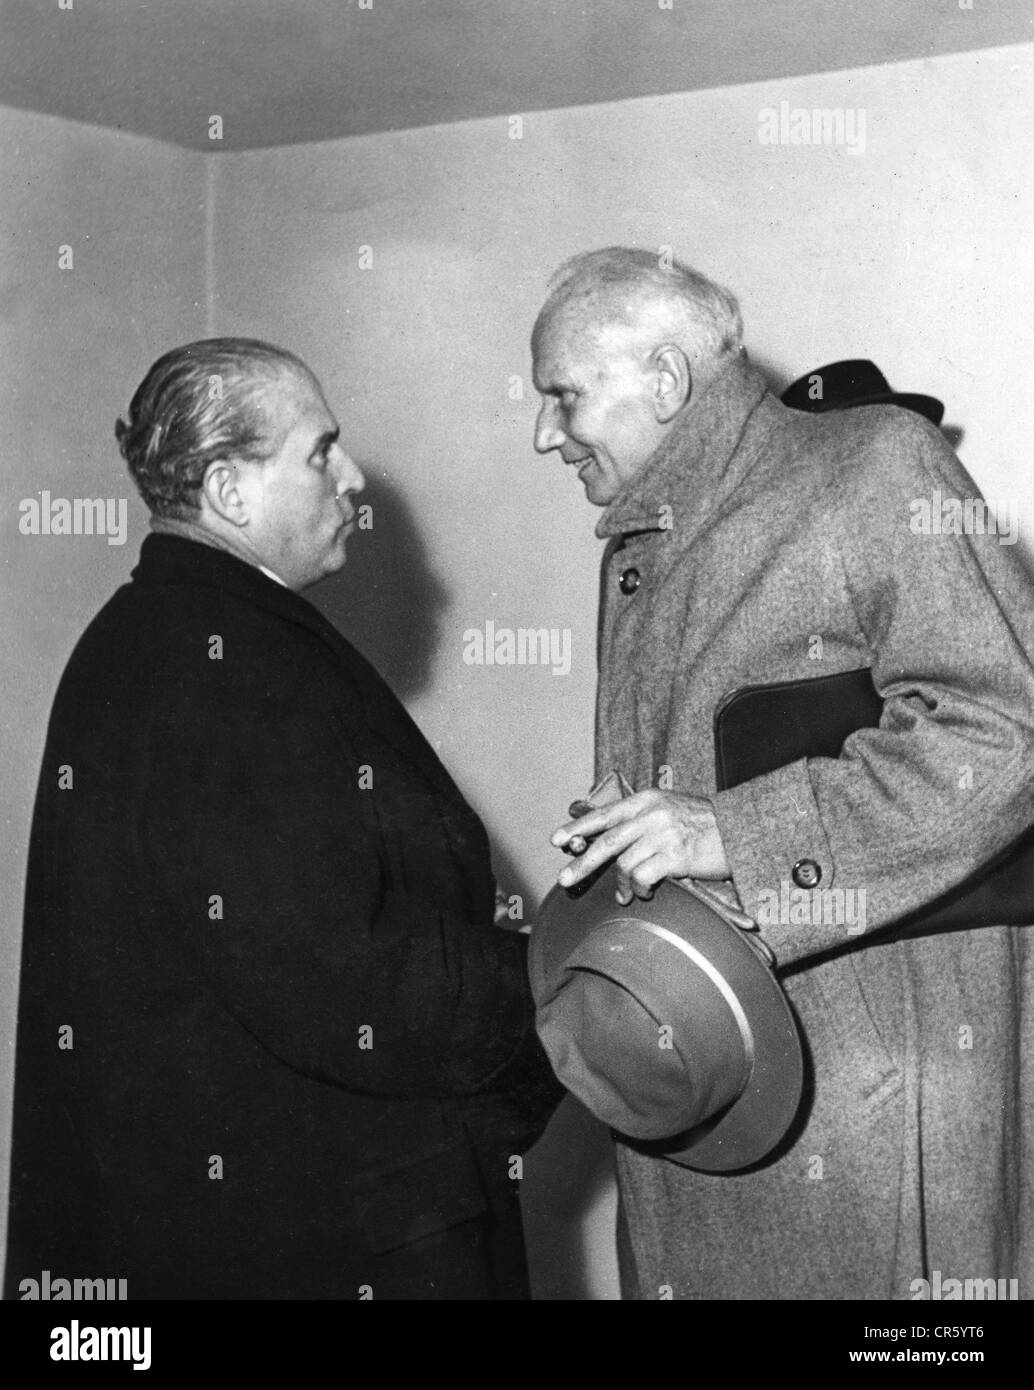 Zuckmayer, Carl, 27.12.1896 - 18.1.1977, German author / writer, half length, talking with Prof. Dr. Walter Gerlach, photo taken on the occasion of the premiere of his theatre play 'Das Kalte Licht' (The Cold Light), Munich, circa 1962, Stock Photo